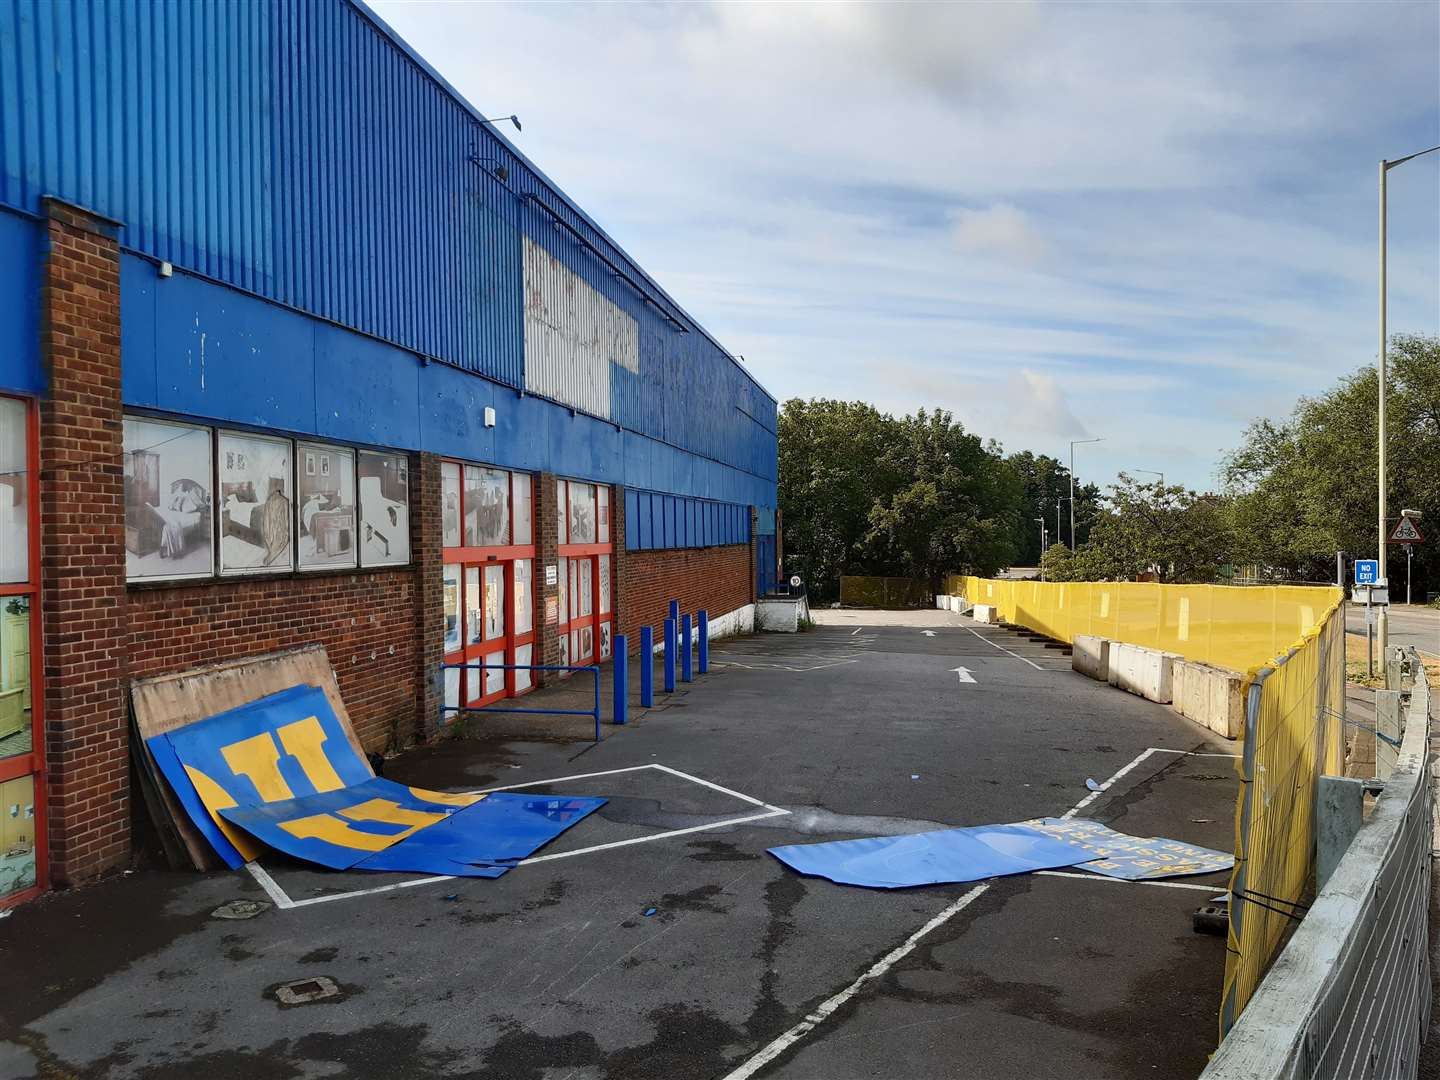 The ex-HomePlus site has now been cordoned off ahead of demolition to make way for the scheme